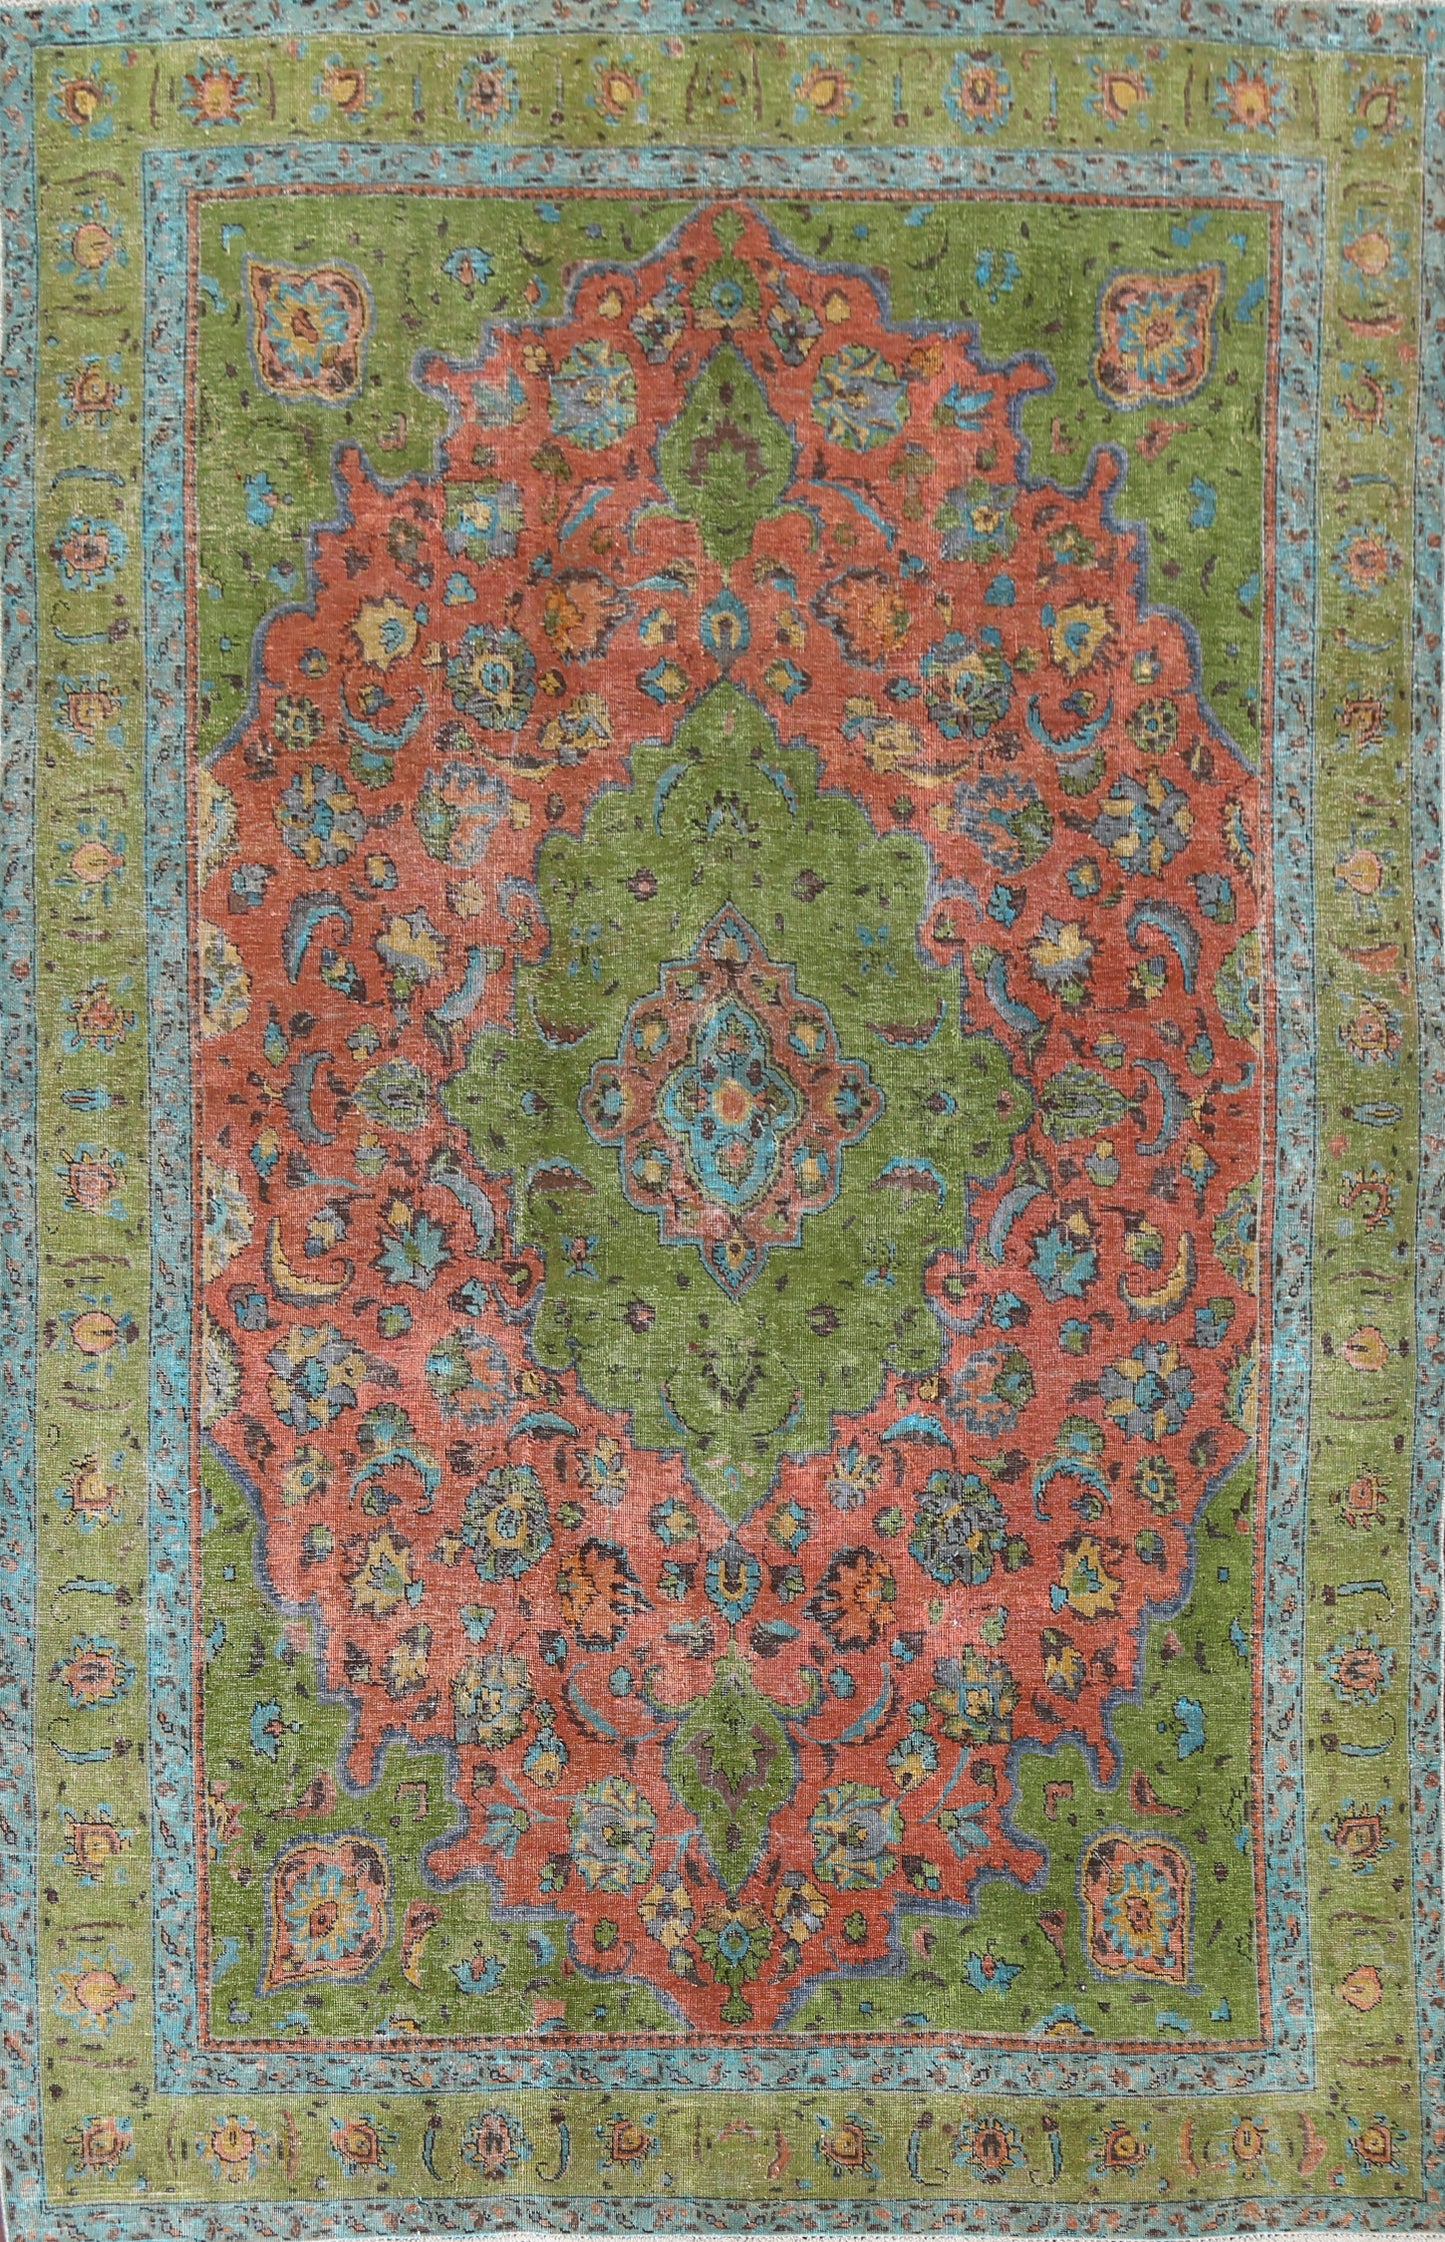 Antique Distressed Over-Dye Mashad Persian Area Rug 8x11